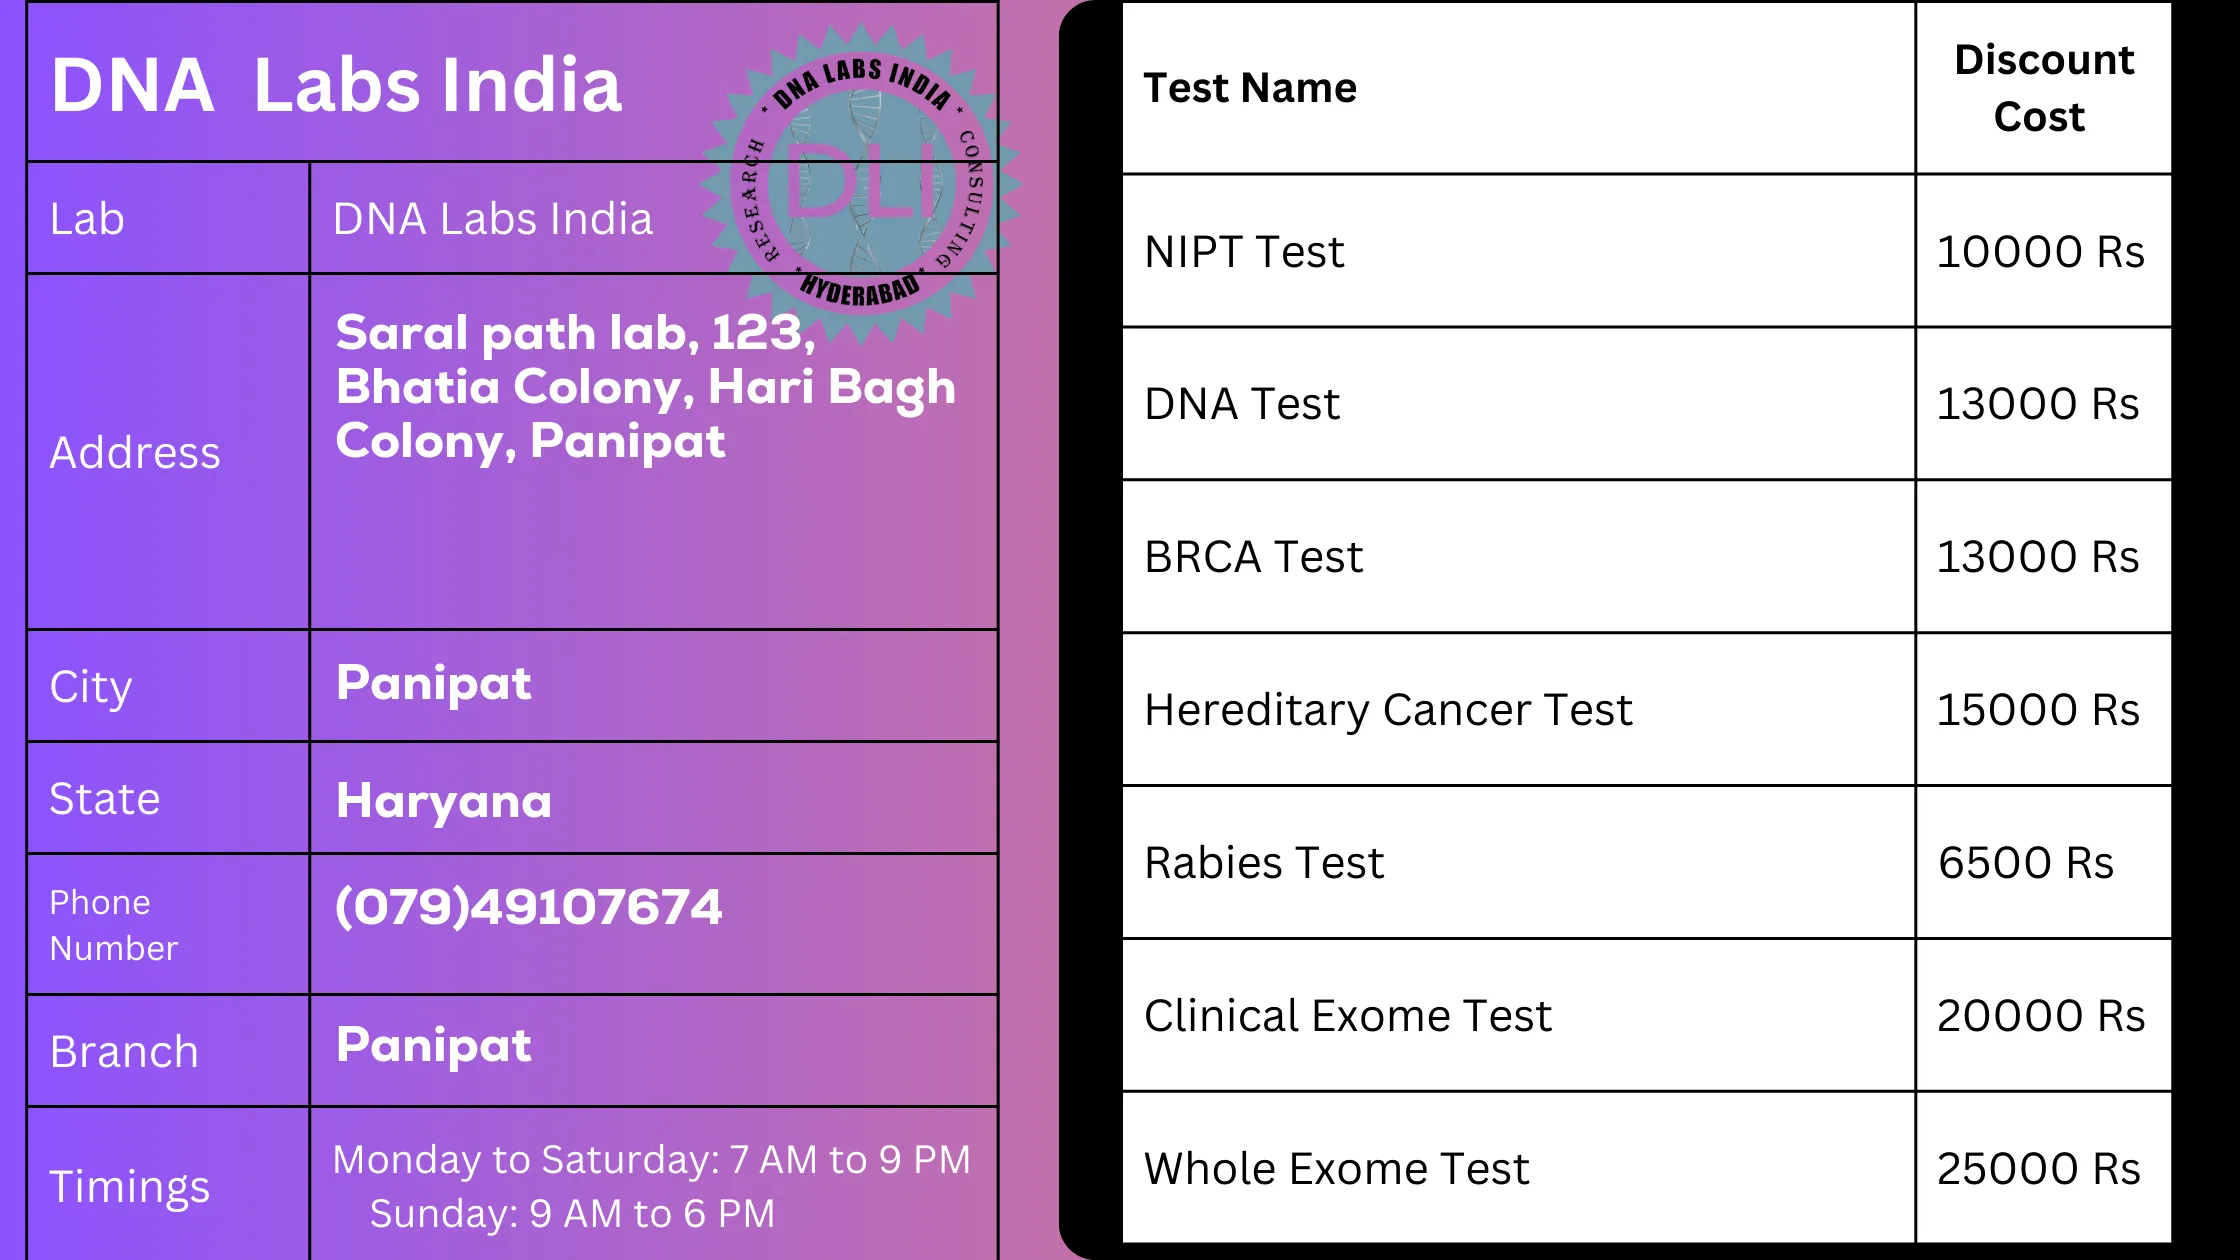 DNA Labs India: Your Trusted Genetic Testing Partner in Panipat